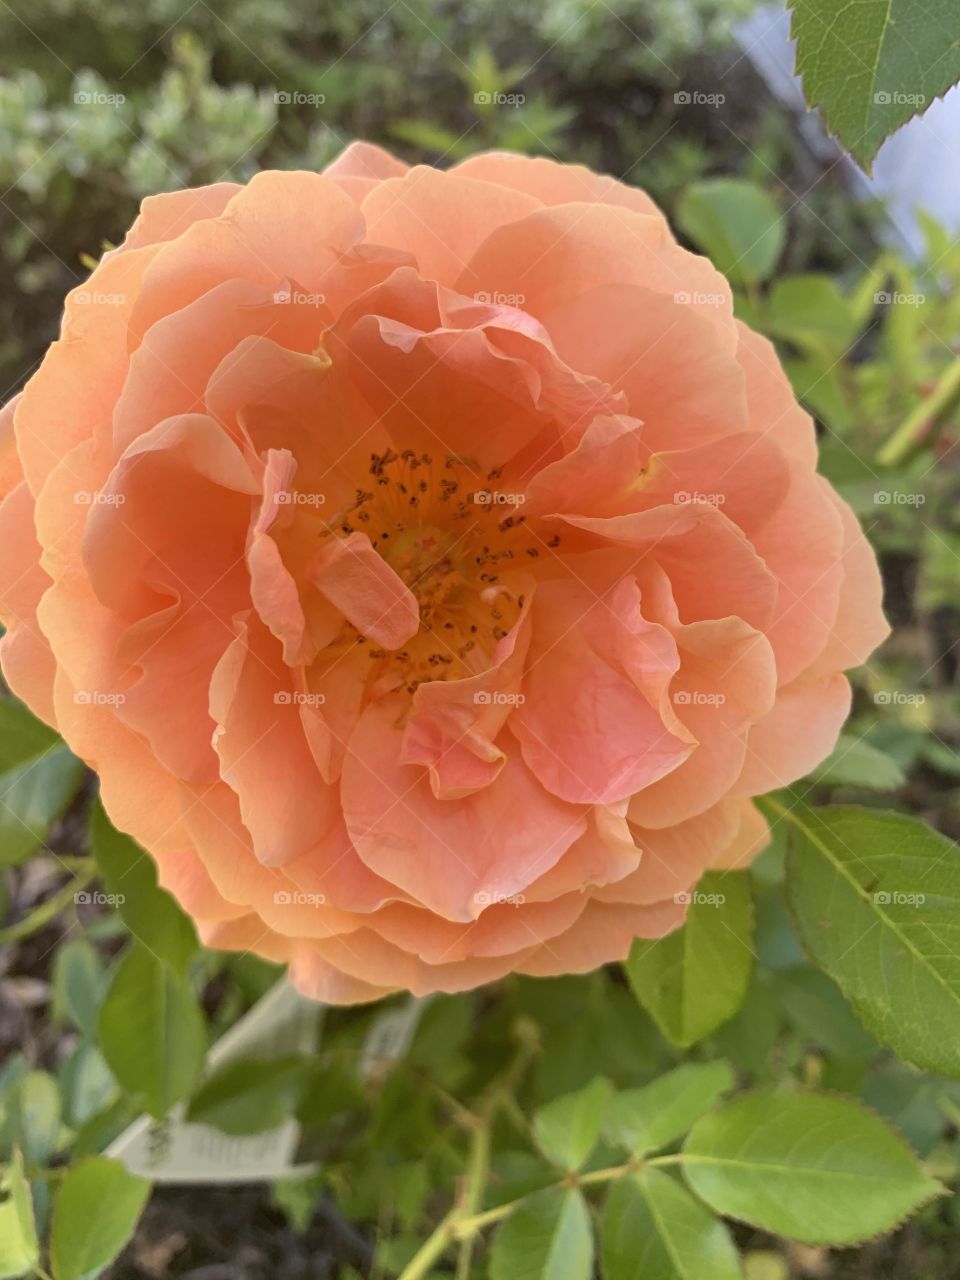 Beauty can be found in the simplest things. Look at the amazing layers of petals on this bright peach colour led flower.